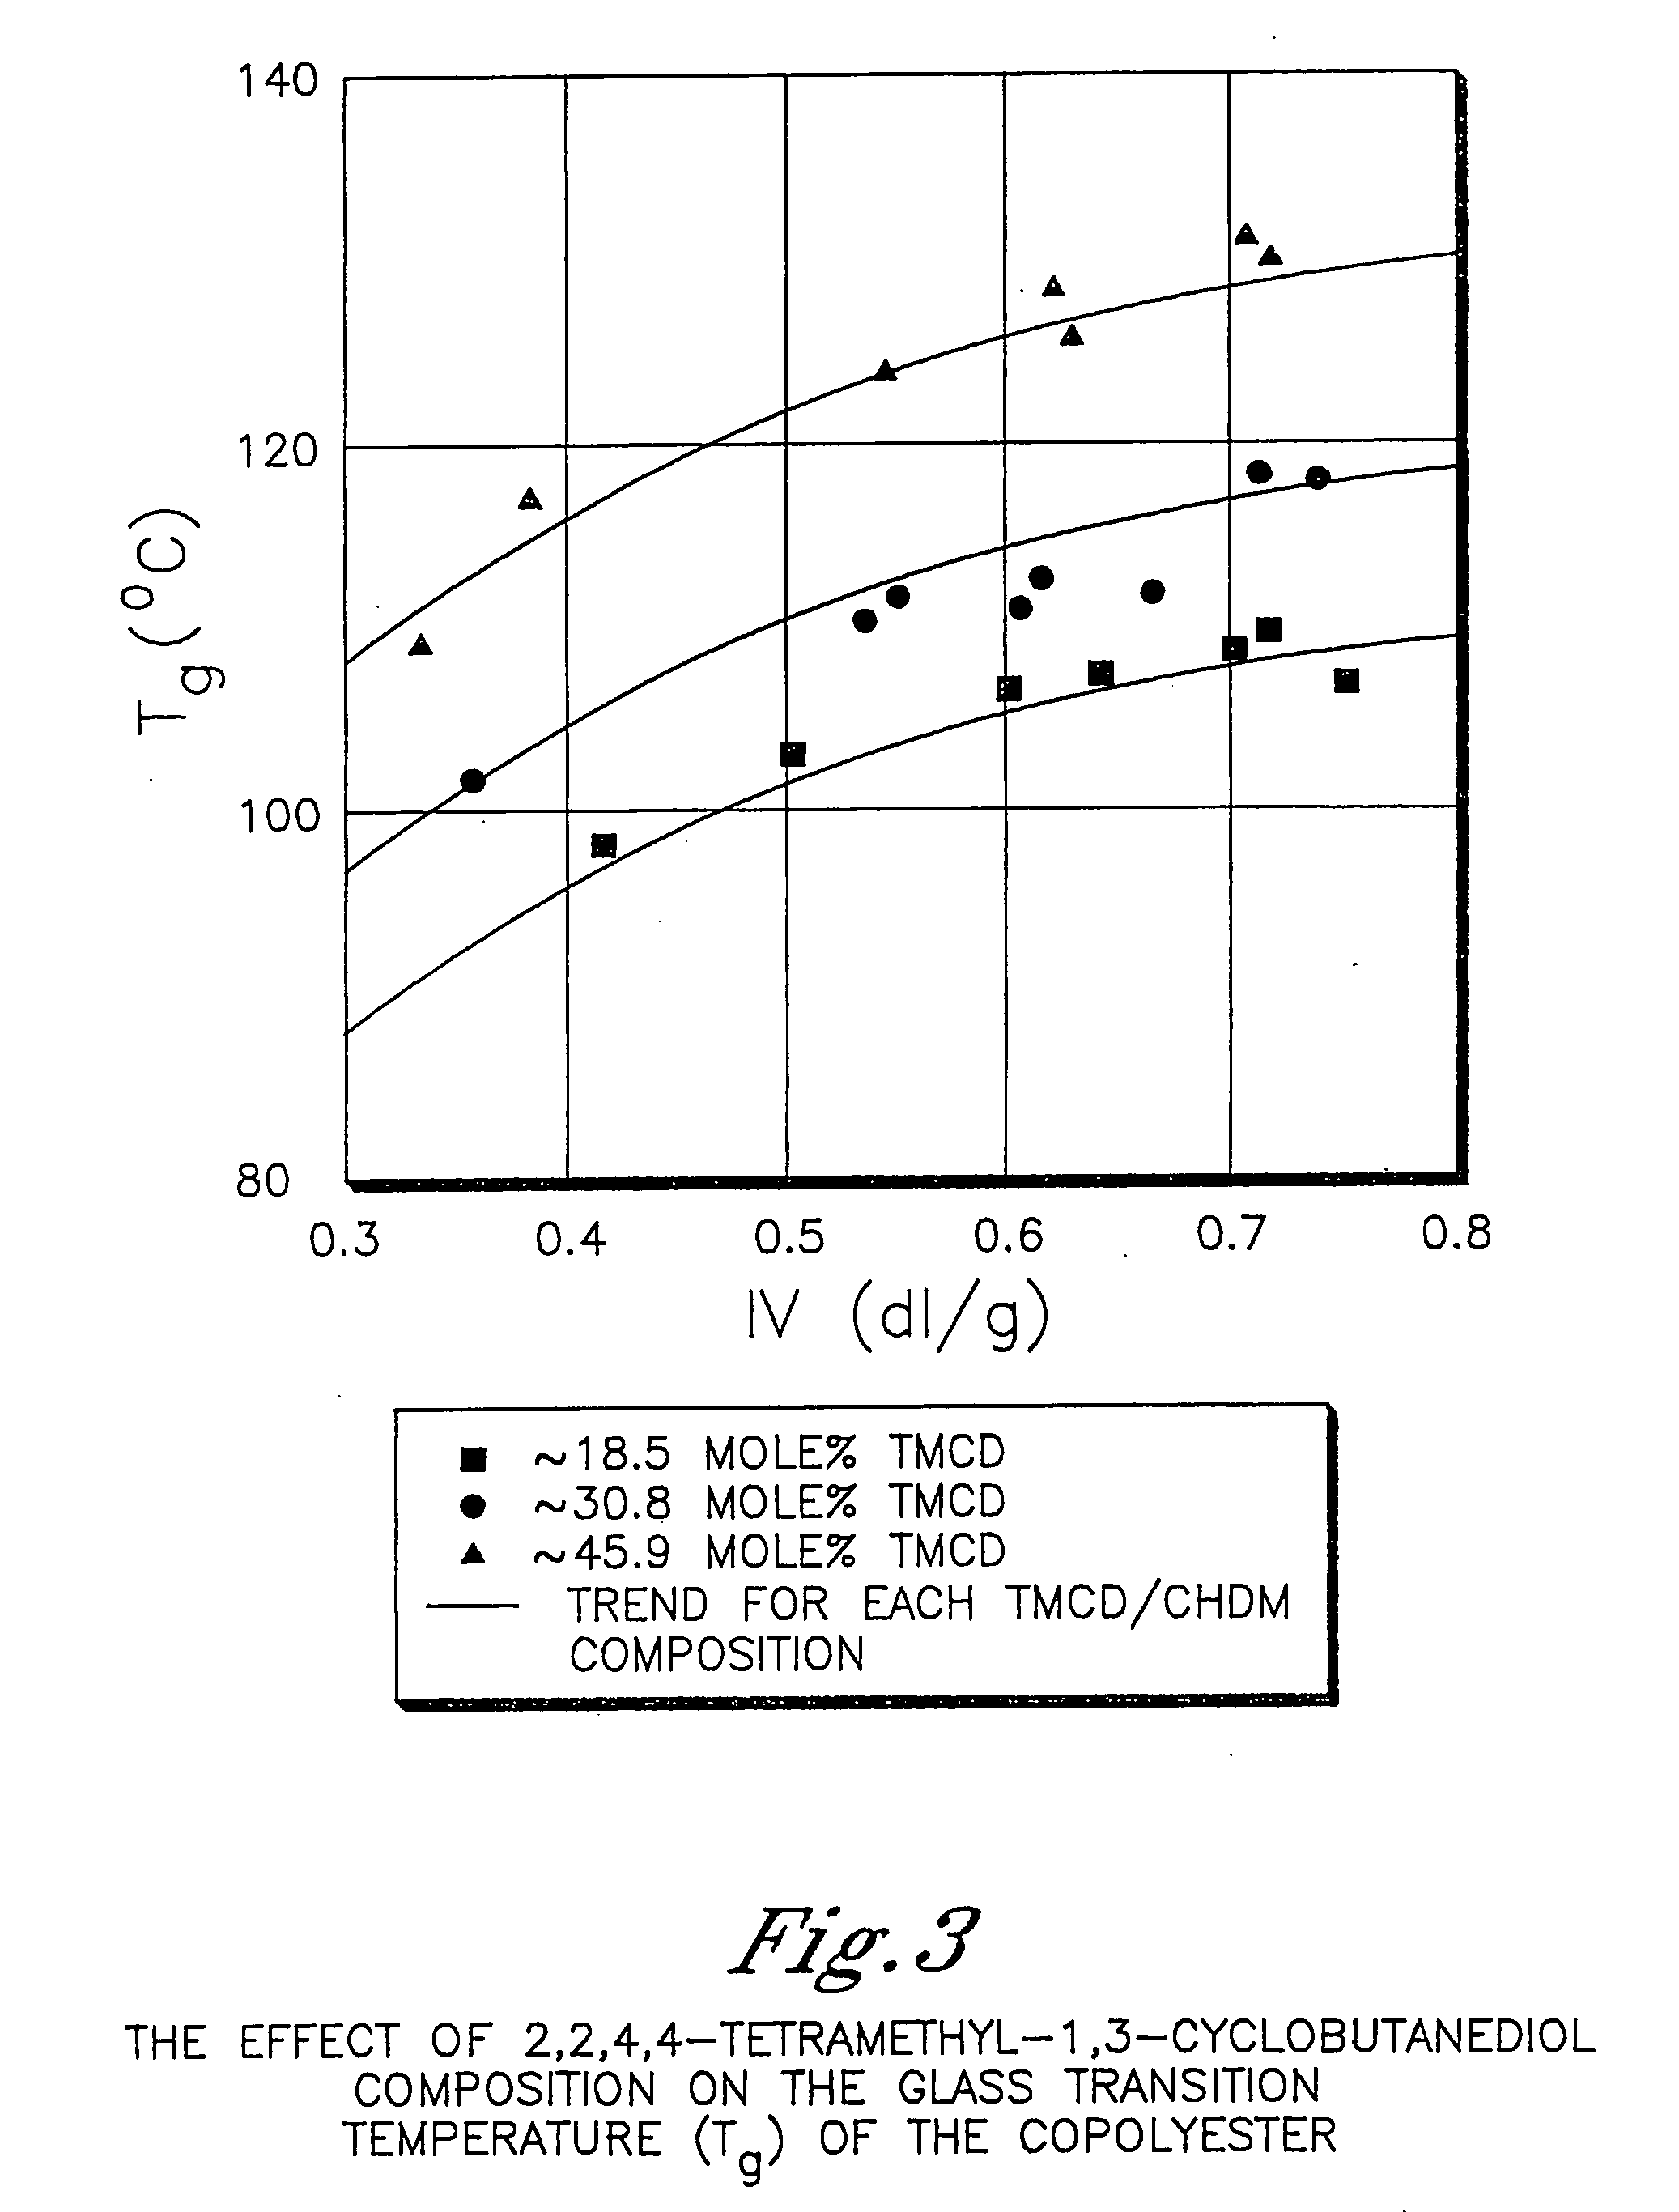 Retort containers comprising polyester compositions formed from 2,2,4,4-tetramethyl-1,3-cyclobutanediol and 1,4-cyclohexanedimethanol